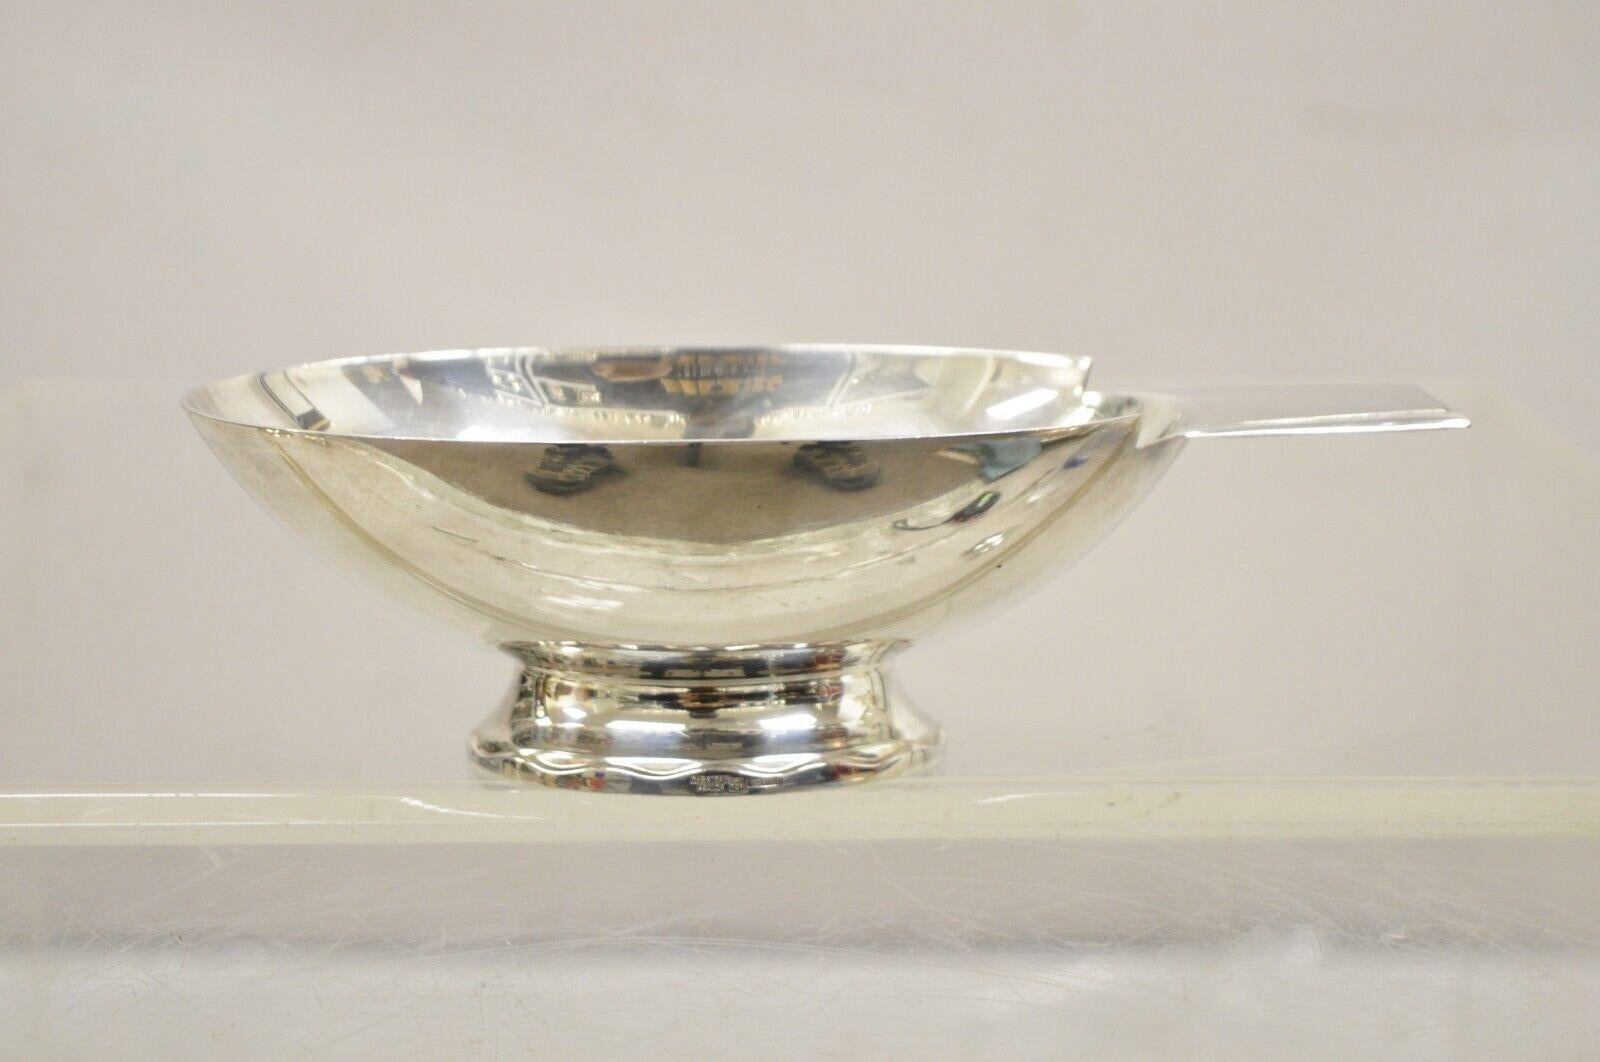 Christofle France Gallia Silver Plated Figural Gravy Sauce Boat Swan Spoon 1